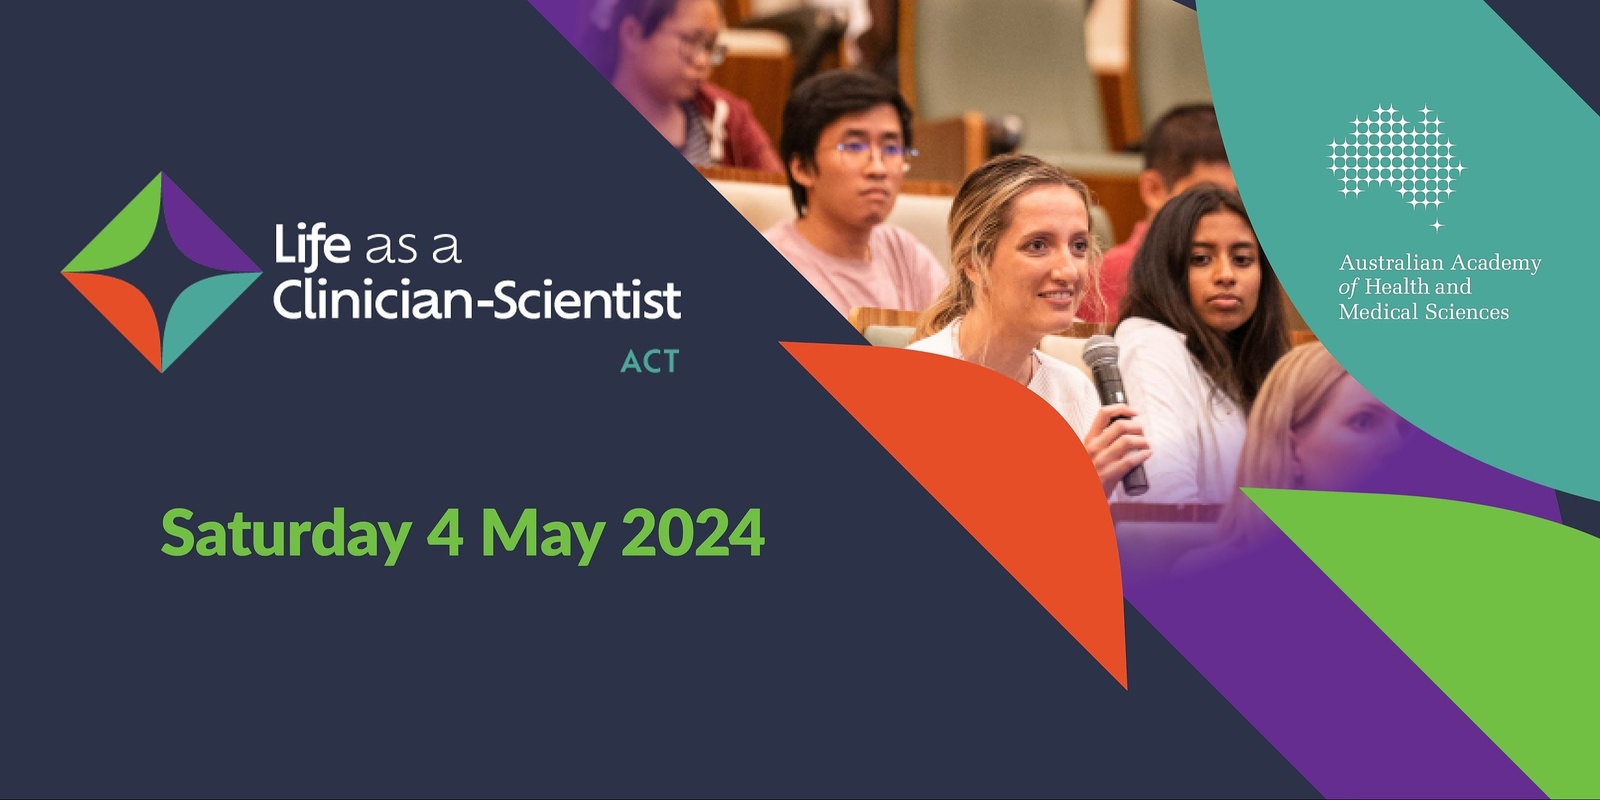 Banner image for Life as a Clinician-Scientist ACT Symposium 2024